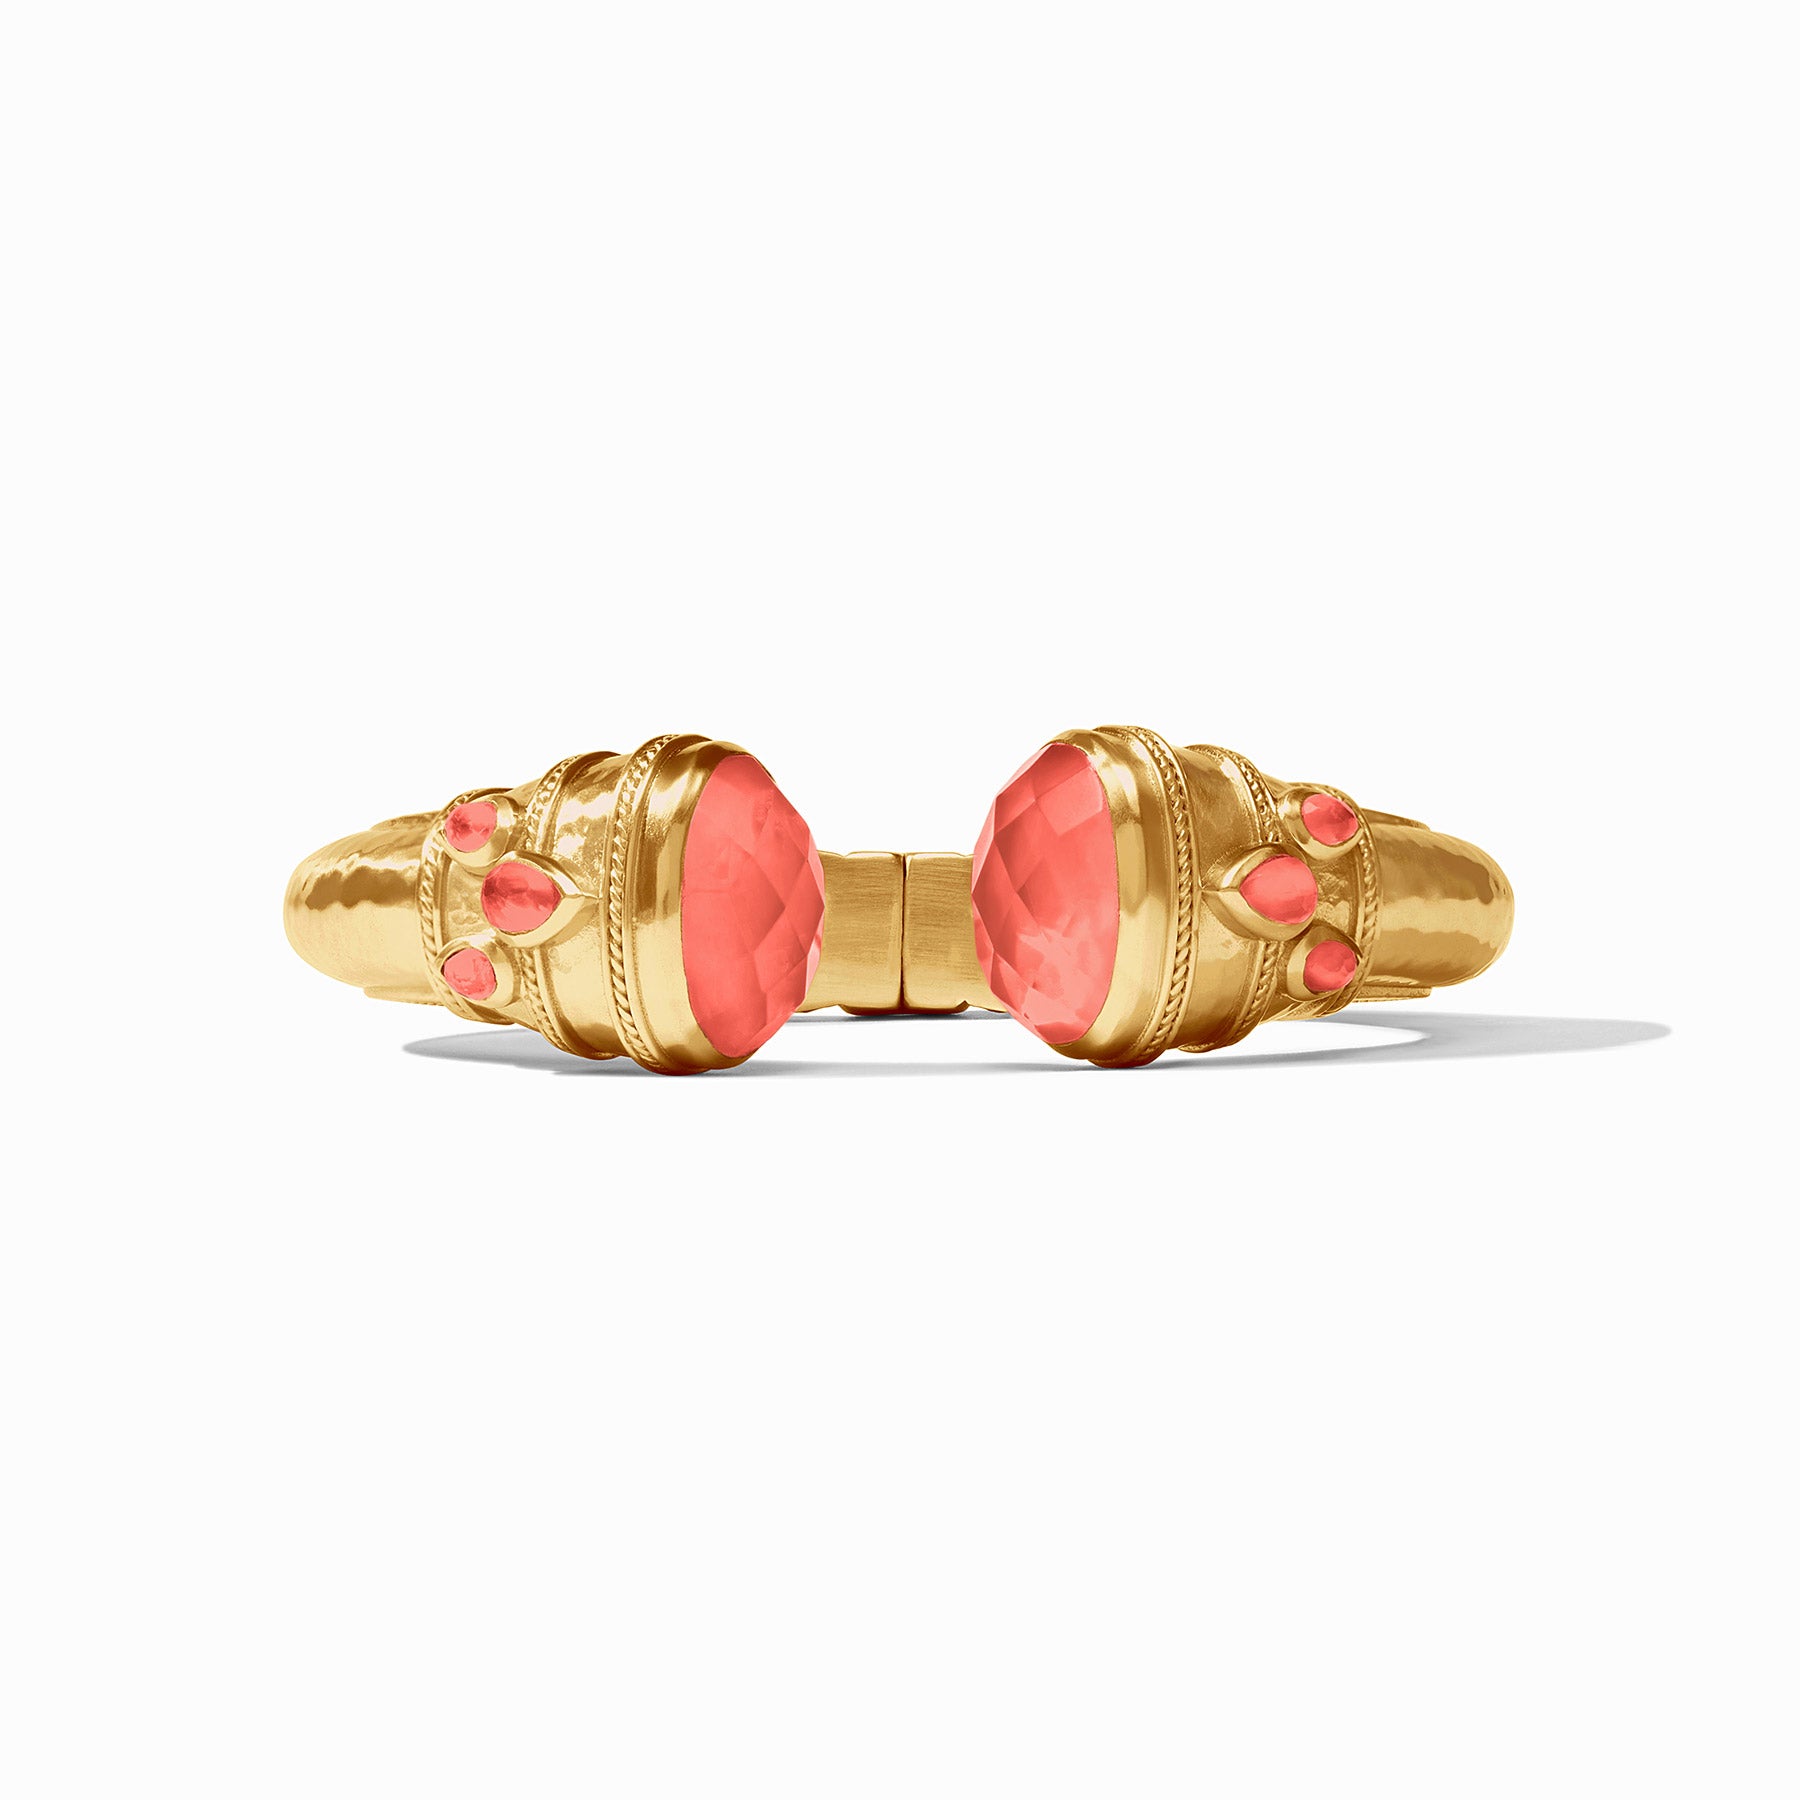 Julie Vos - Cannes Cuff, Iridescent Coral / Small